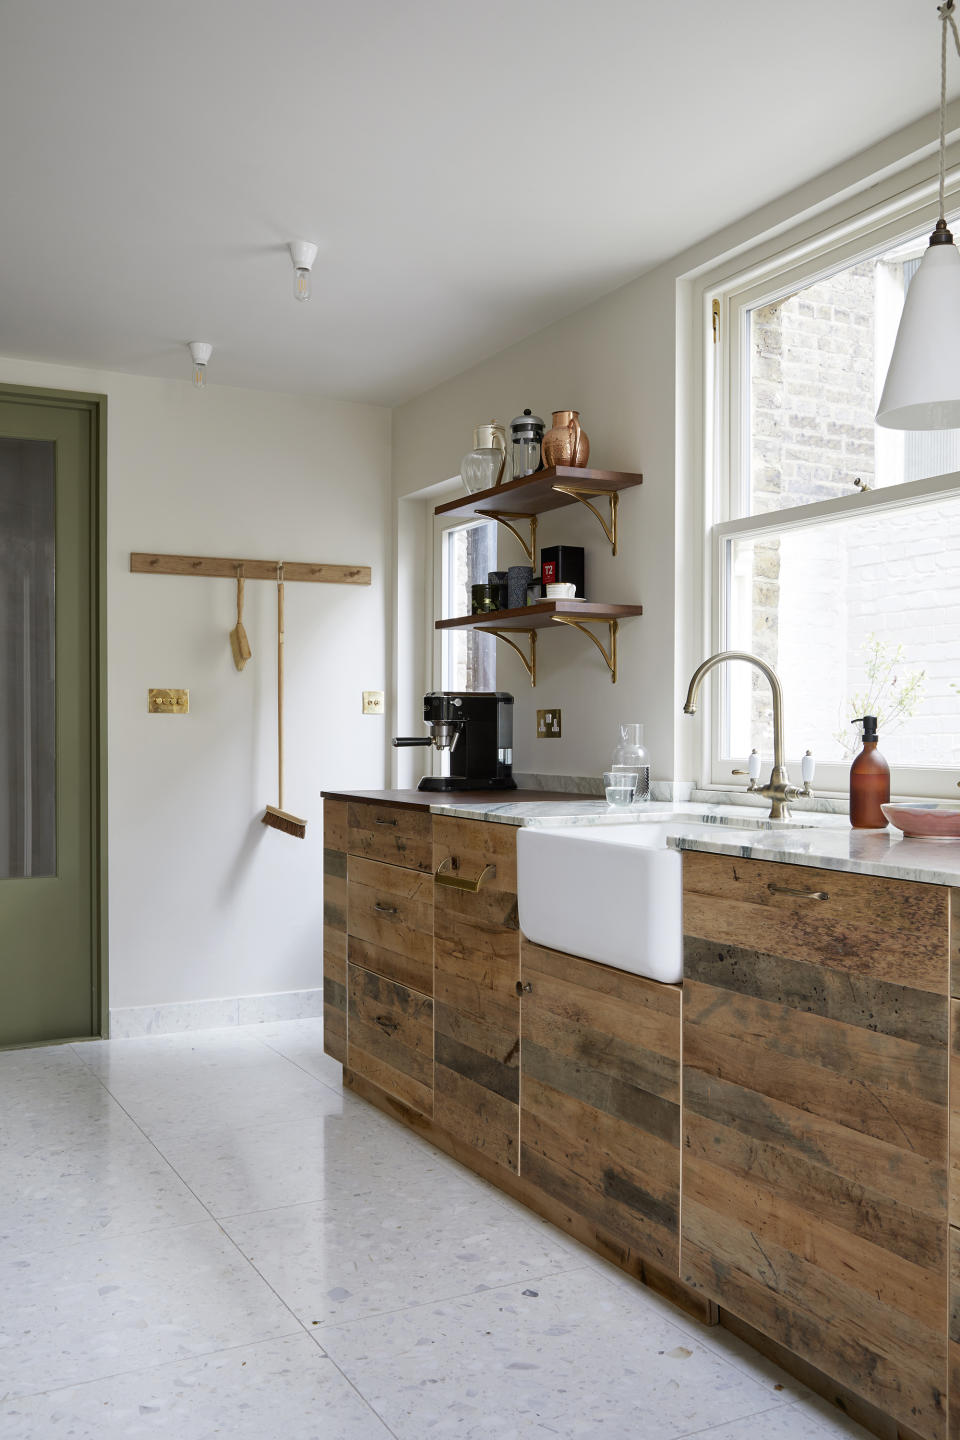 Kitchen with wood clad base cabinets and open wall shelves